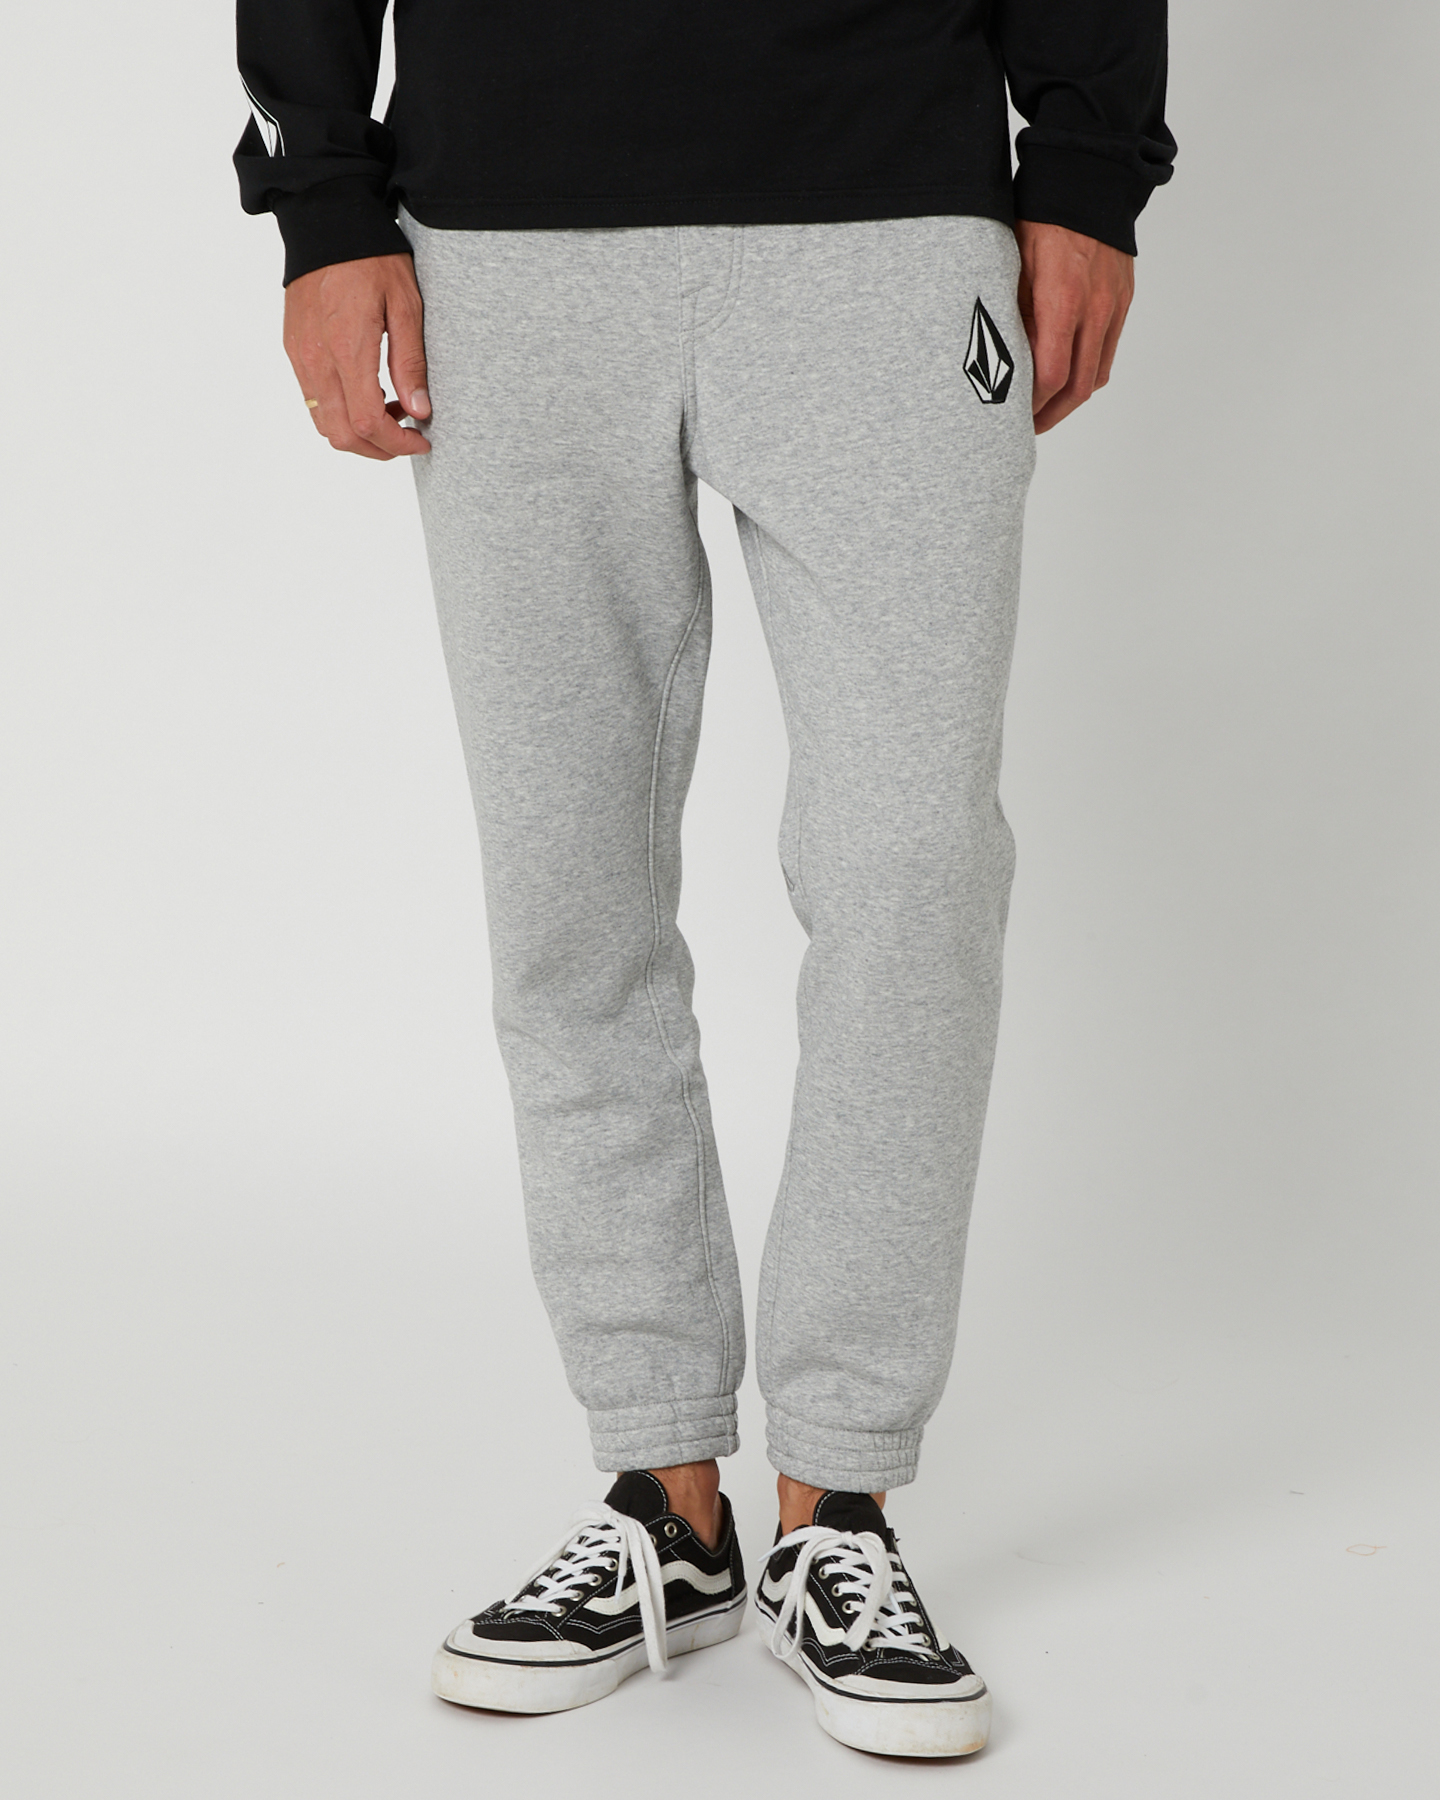 THE NORTH FACE Camp Girls Fleece Joggers - HEATHER GRAY